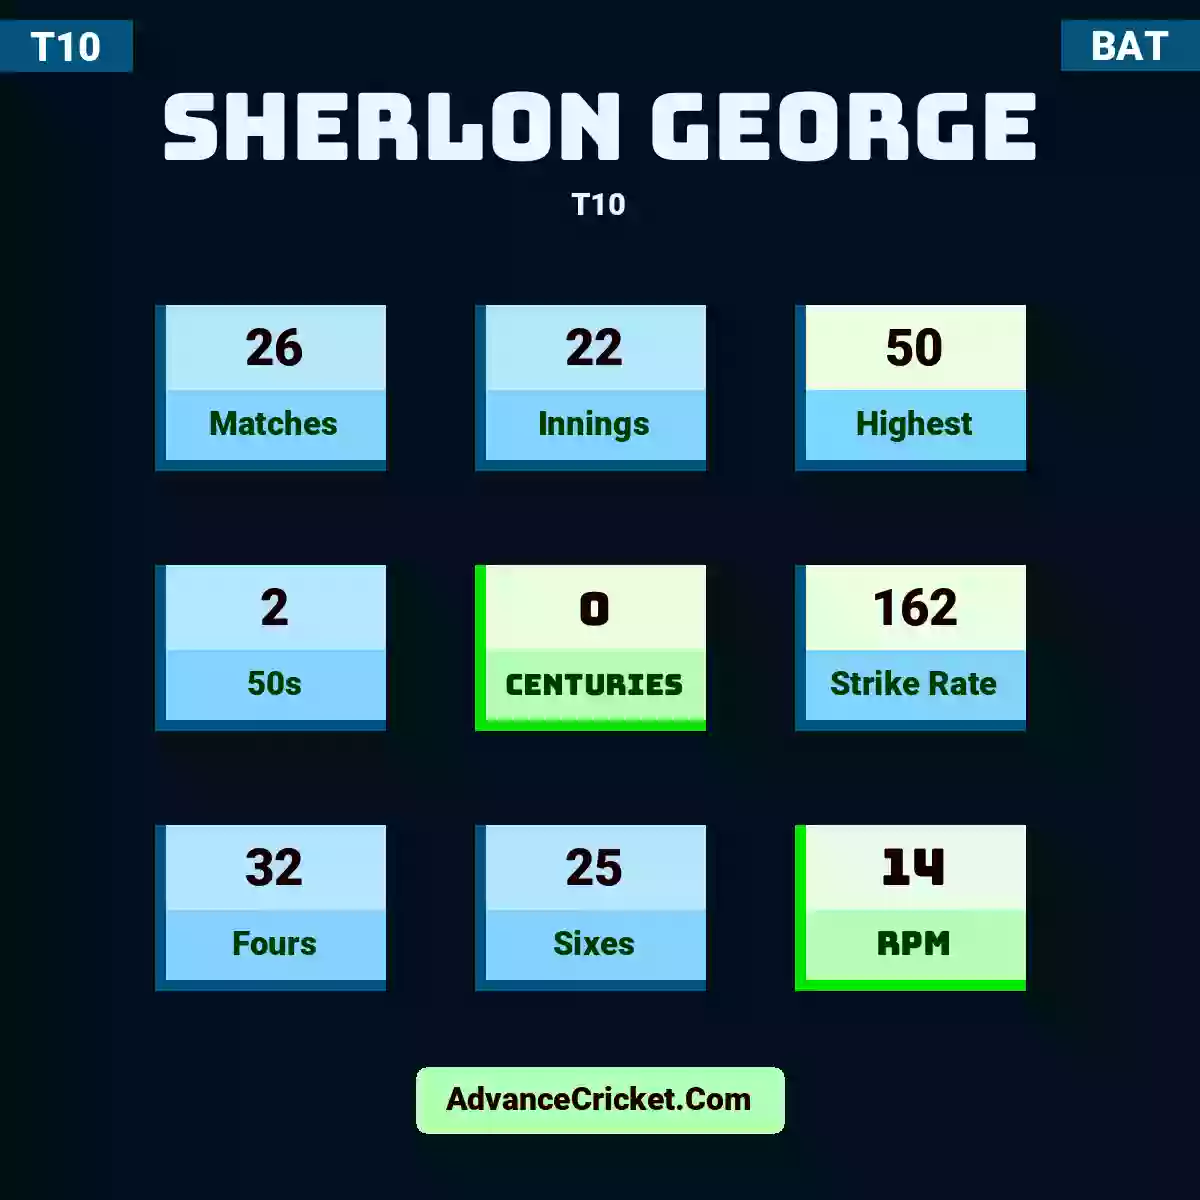 Sherlon George T10 , Sherlon George played 21 matches, scored 50 runs as highest, 2 half-centuries, and 0 centuries, with a strike rate of 166. S.George hit 32 fours and 24 sixes, with an RPM of 17.